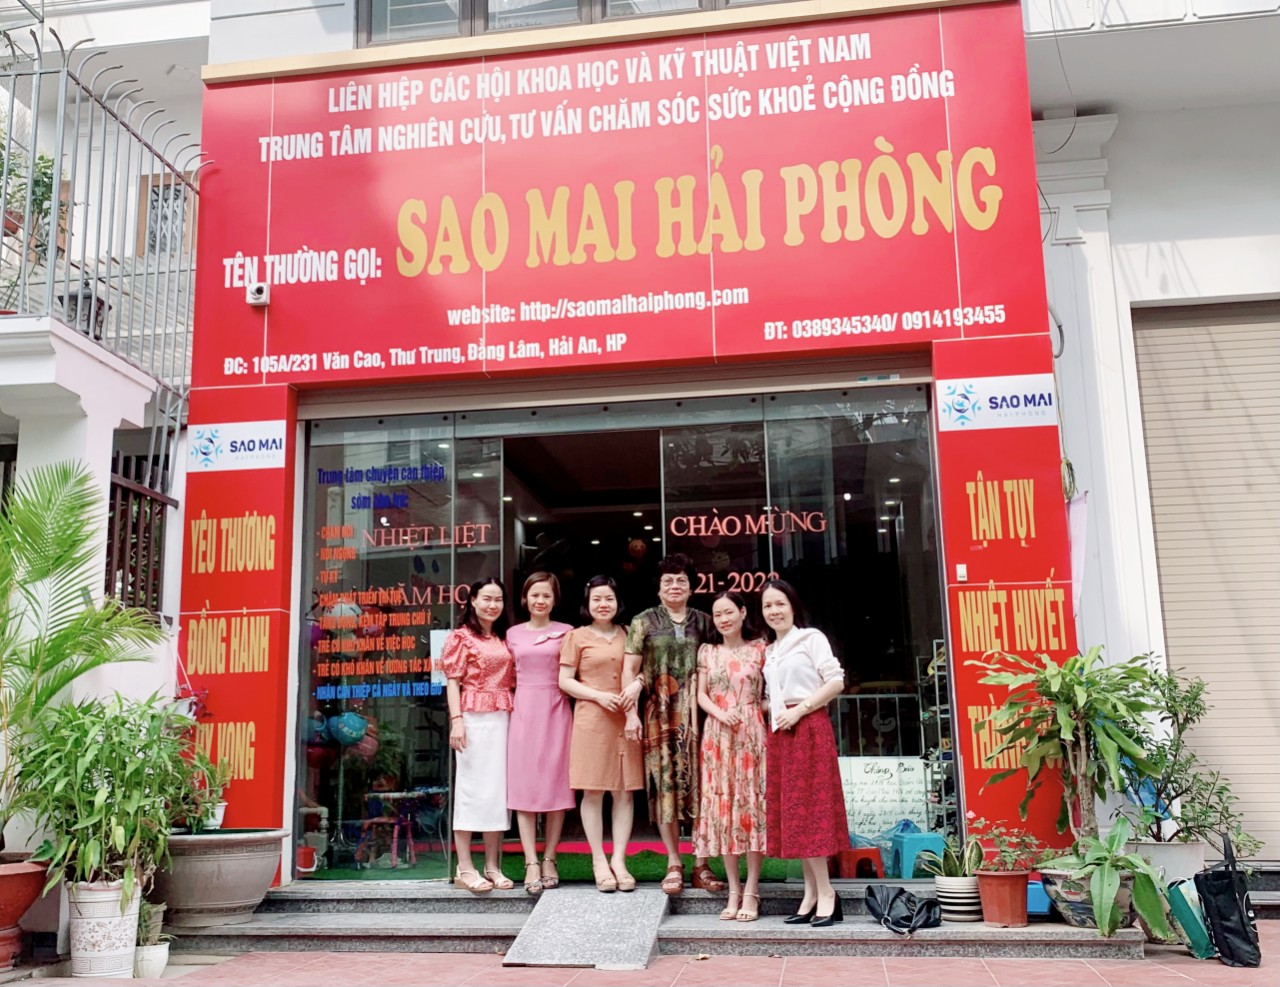 Direct professional sharing and support session at Morning Star Hai Phong Center